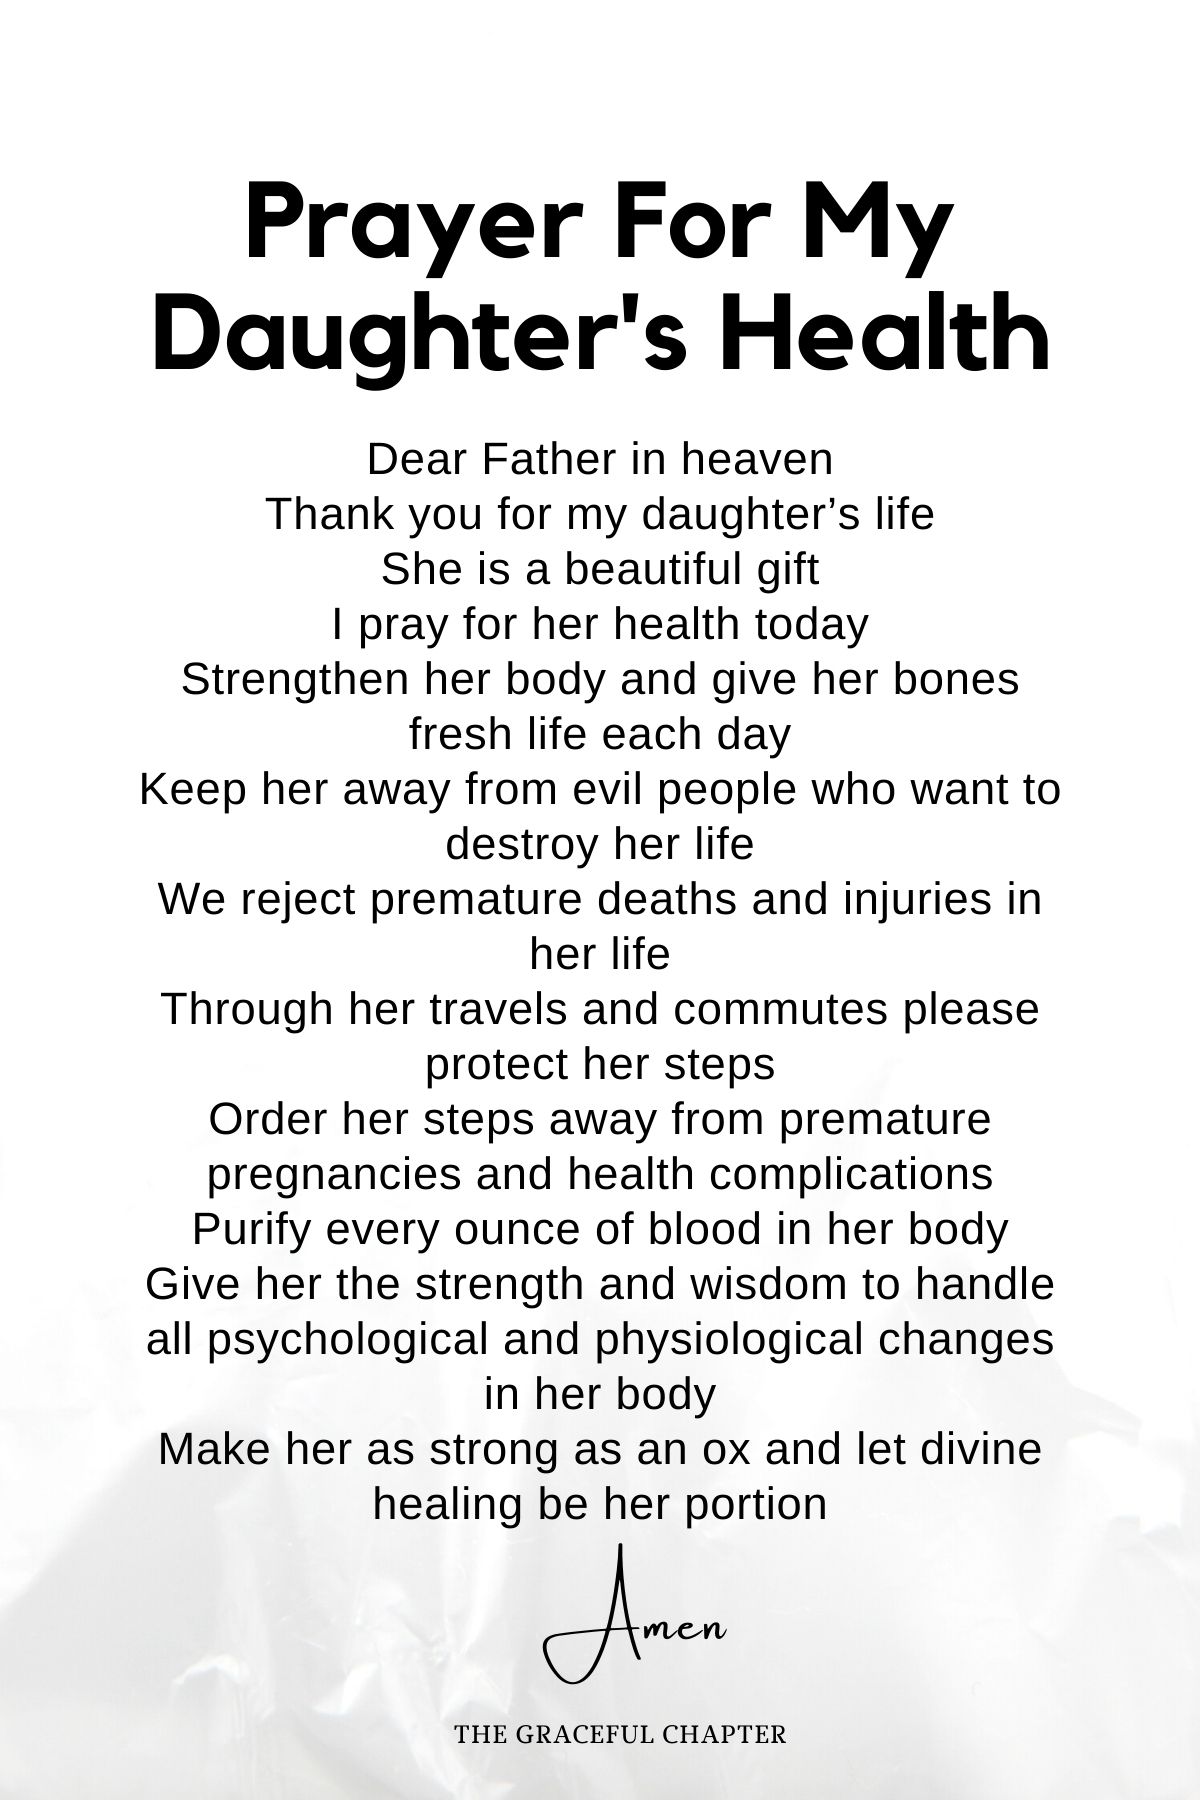 Prayers for my daughter's health